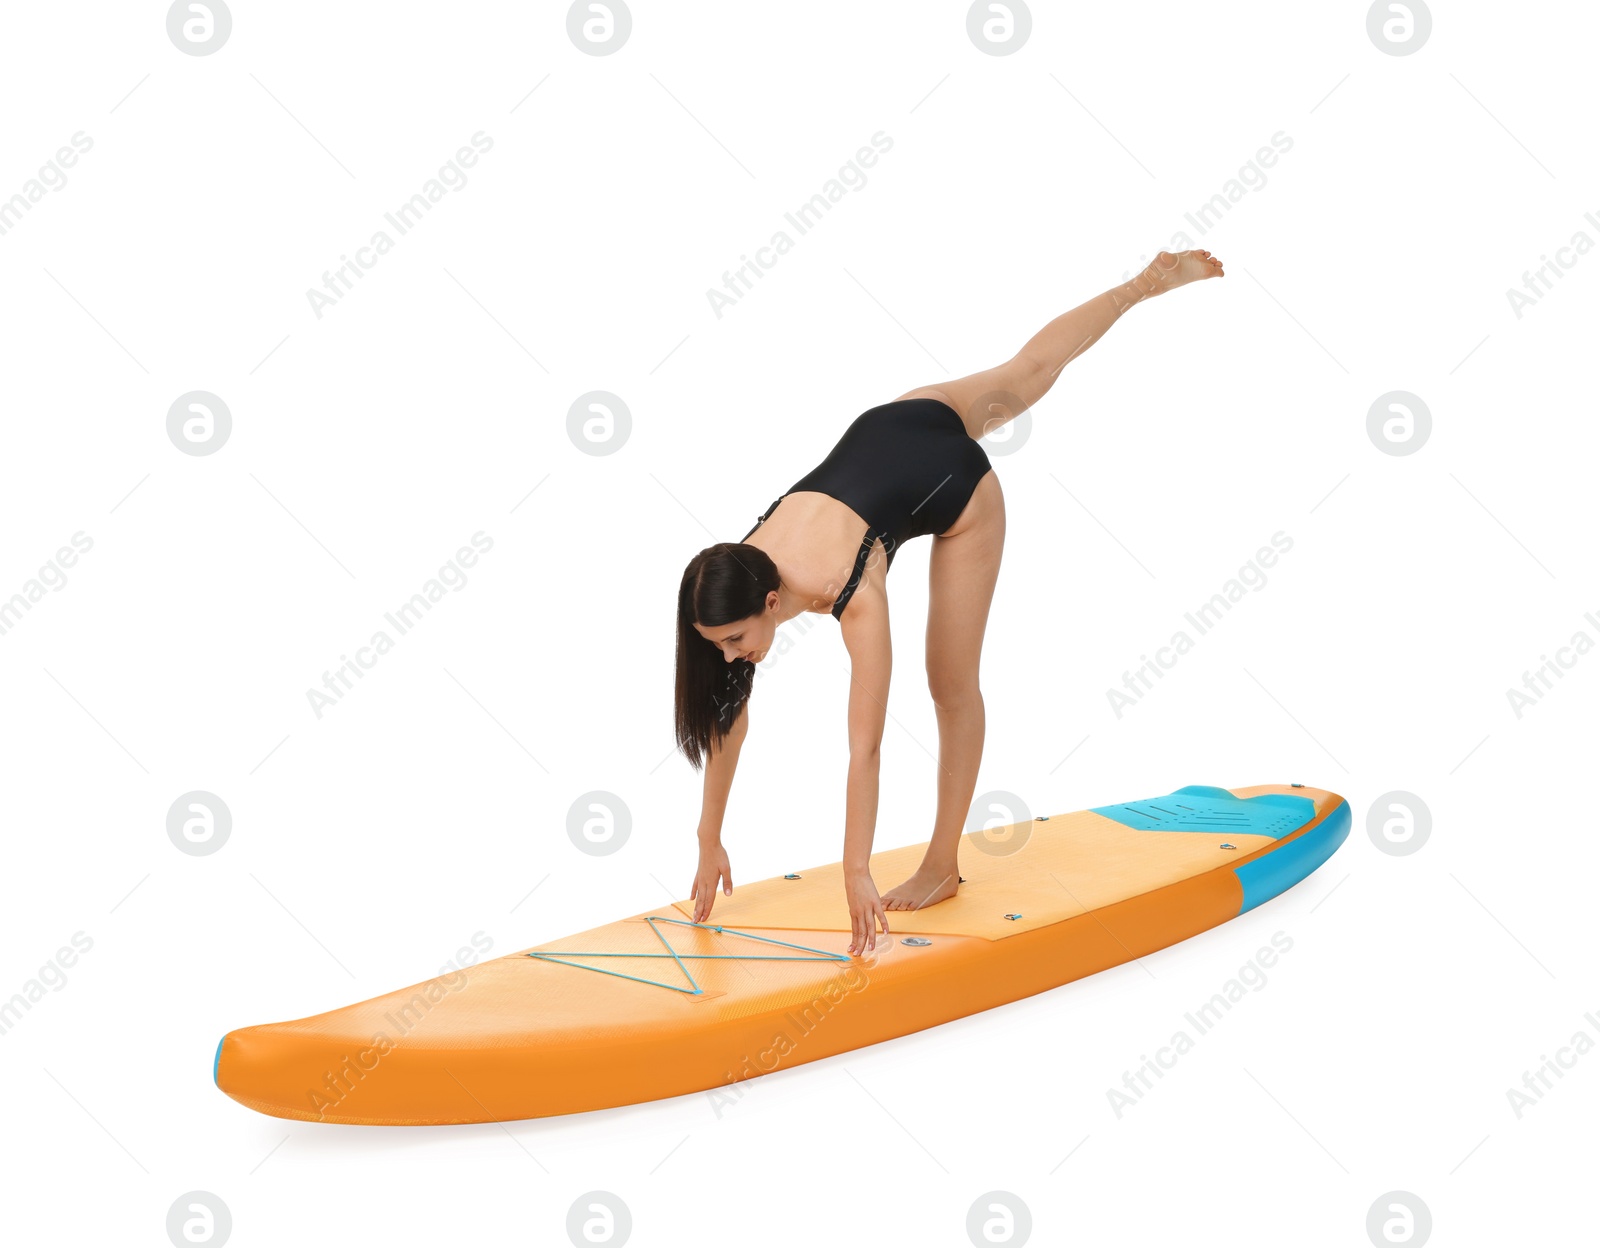 Photo of Woman practicing yoga on orange SUP board against white background